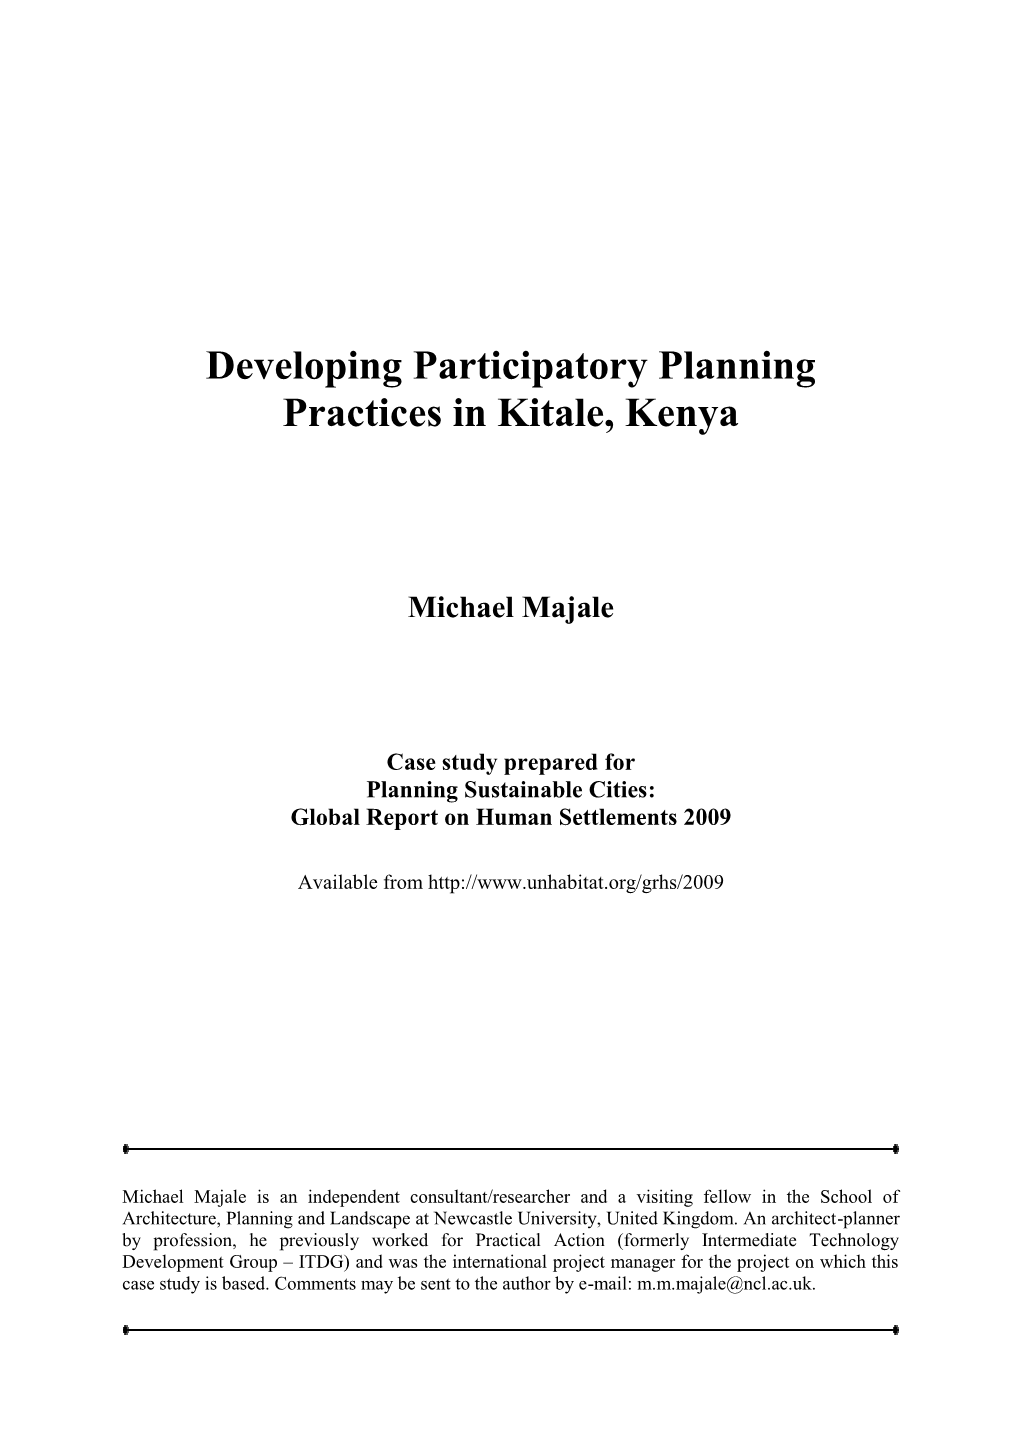 Developing Participatory Planning Practices in Kitale, Kenya